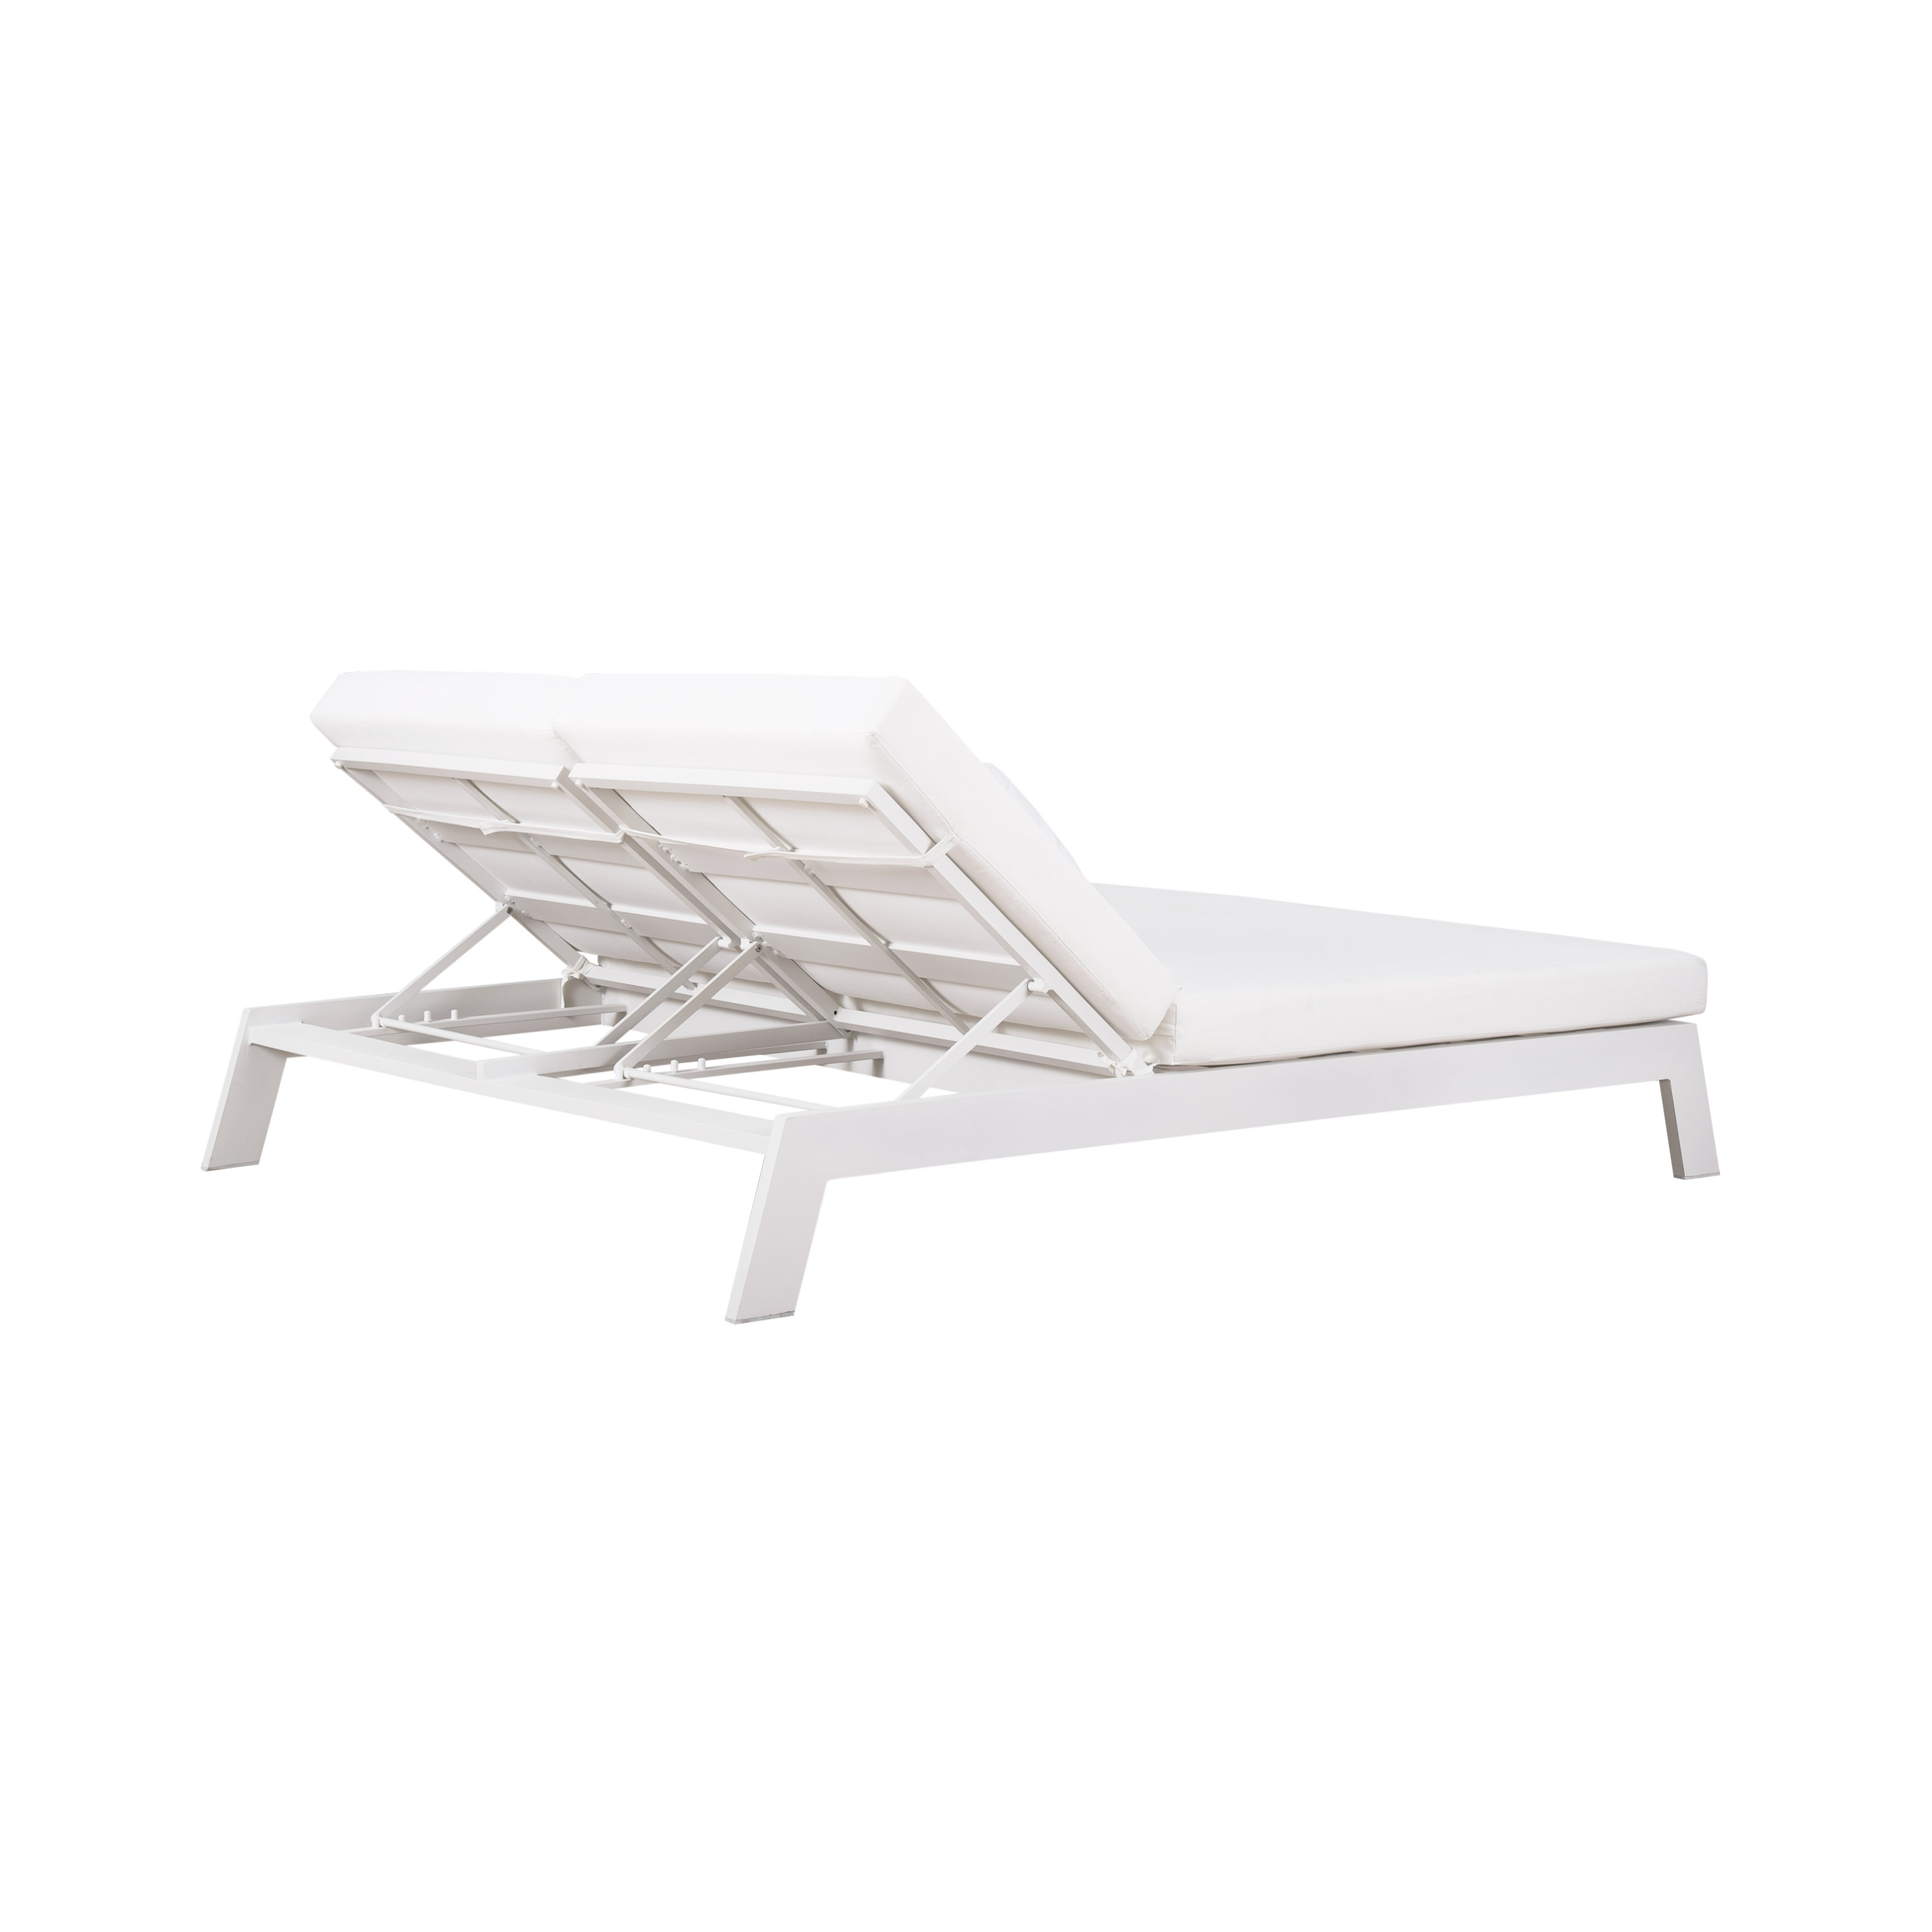 Casa alu.double daybed S5